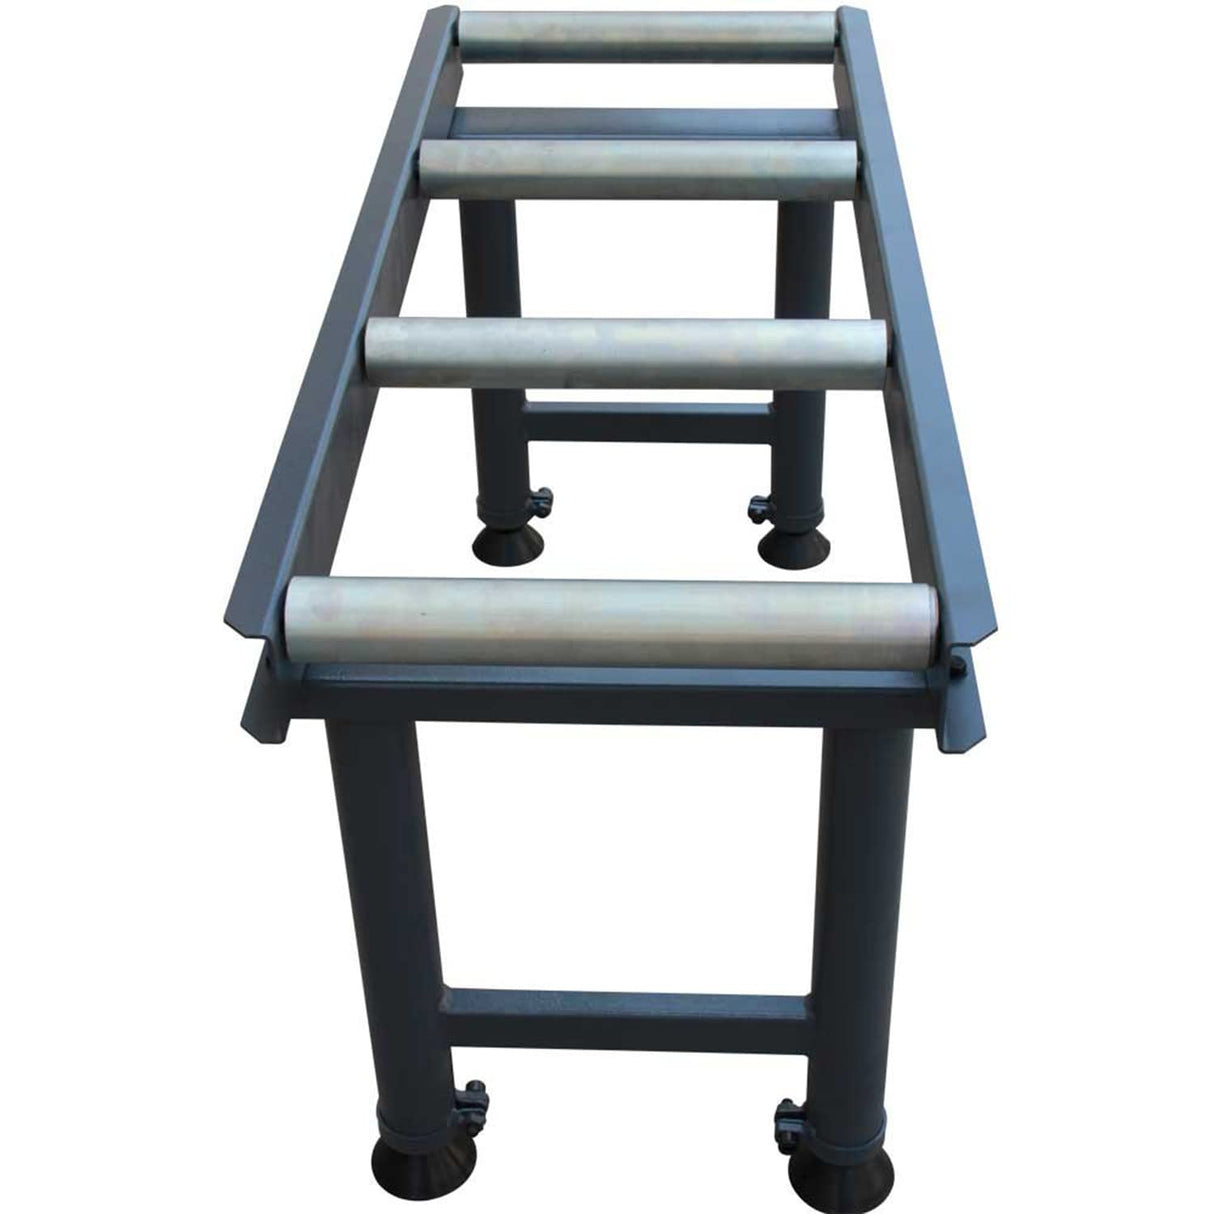 KANG RB-365 Stands and Supports Heavy-Duty 4 Roller Table 600kg Capacity, Roller Conveyor with Adjustable Stands